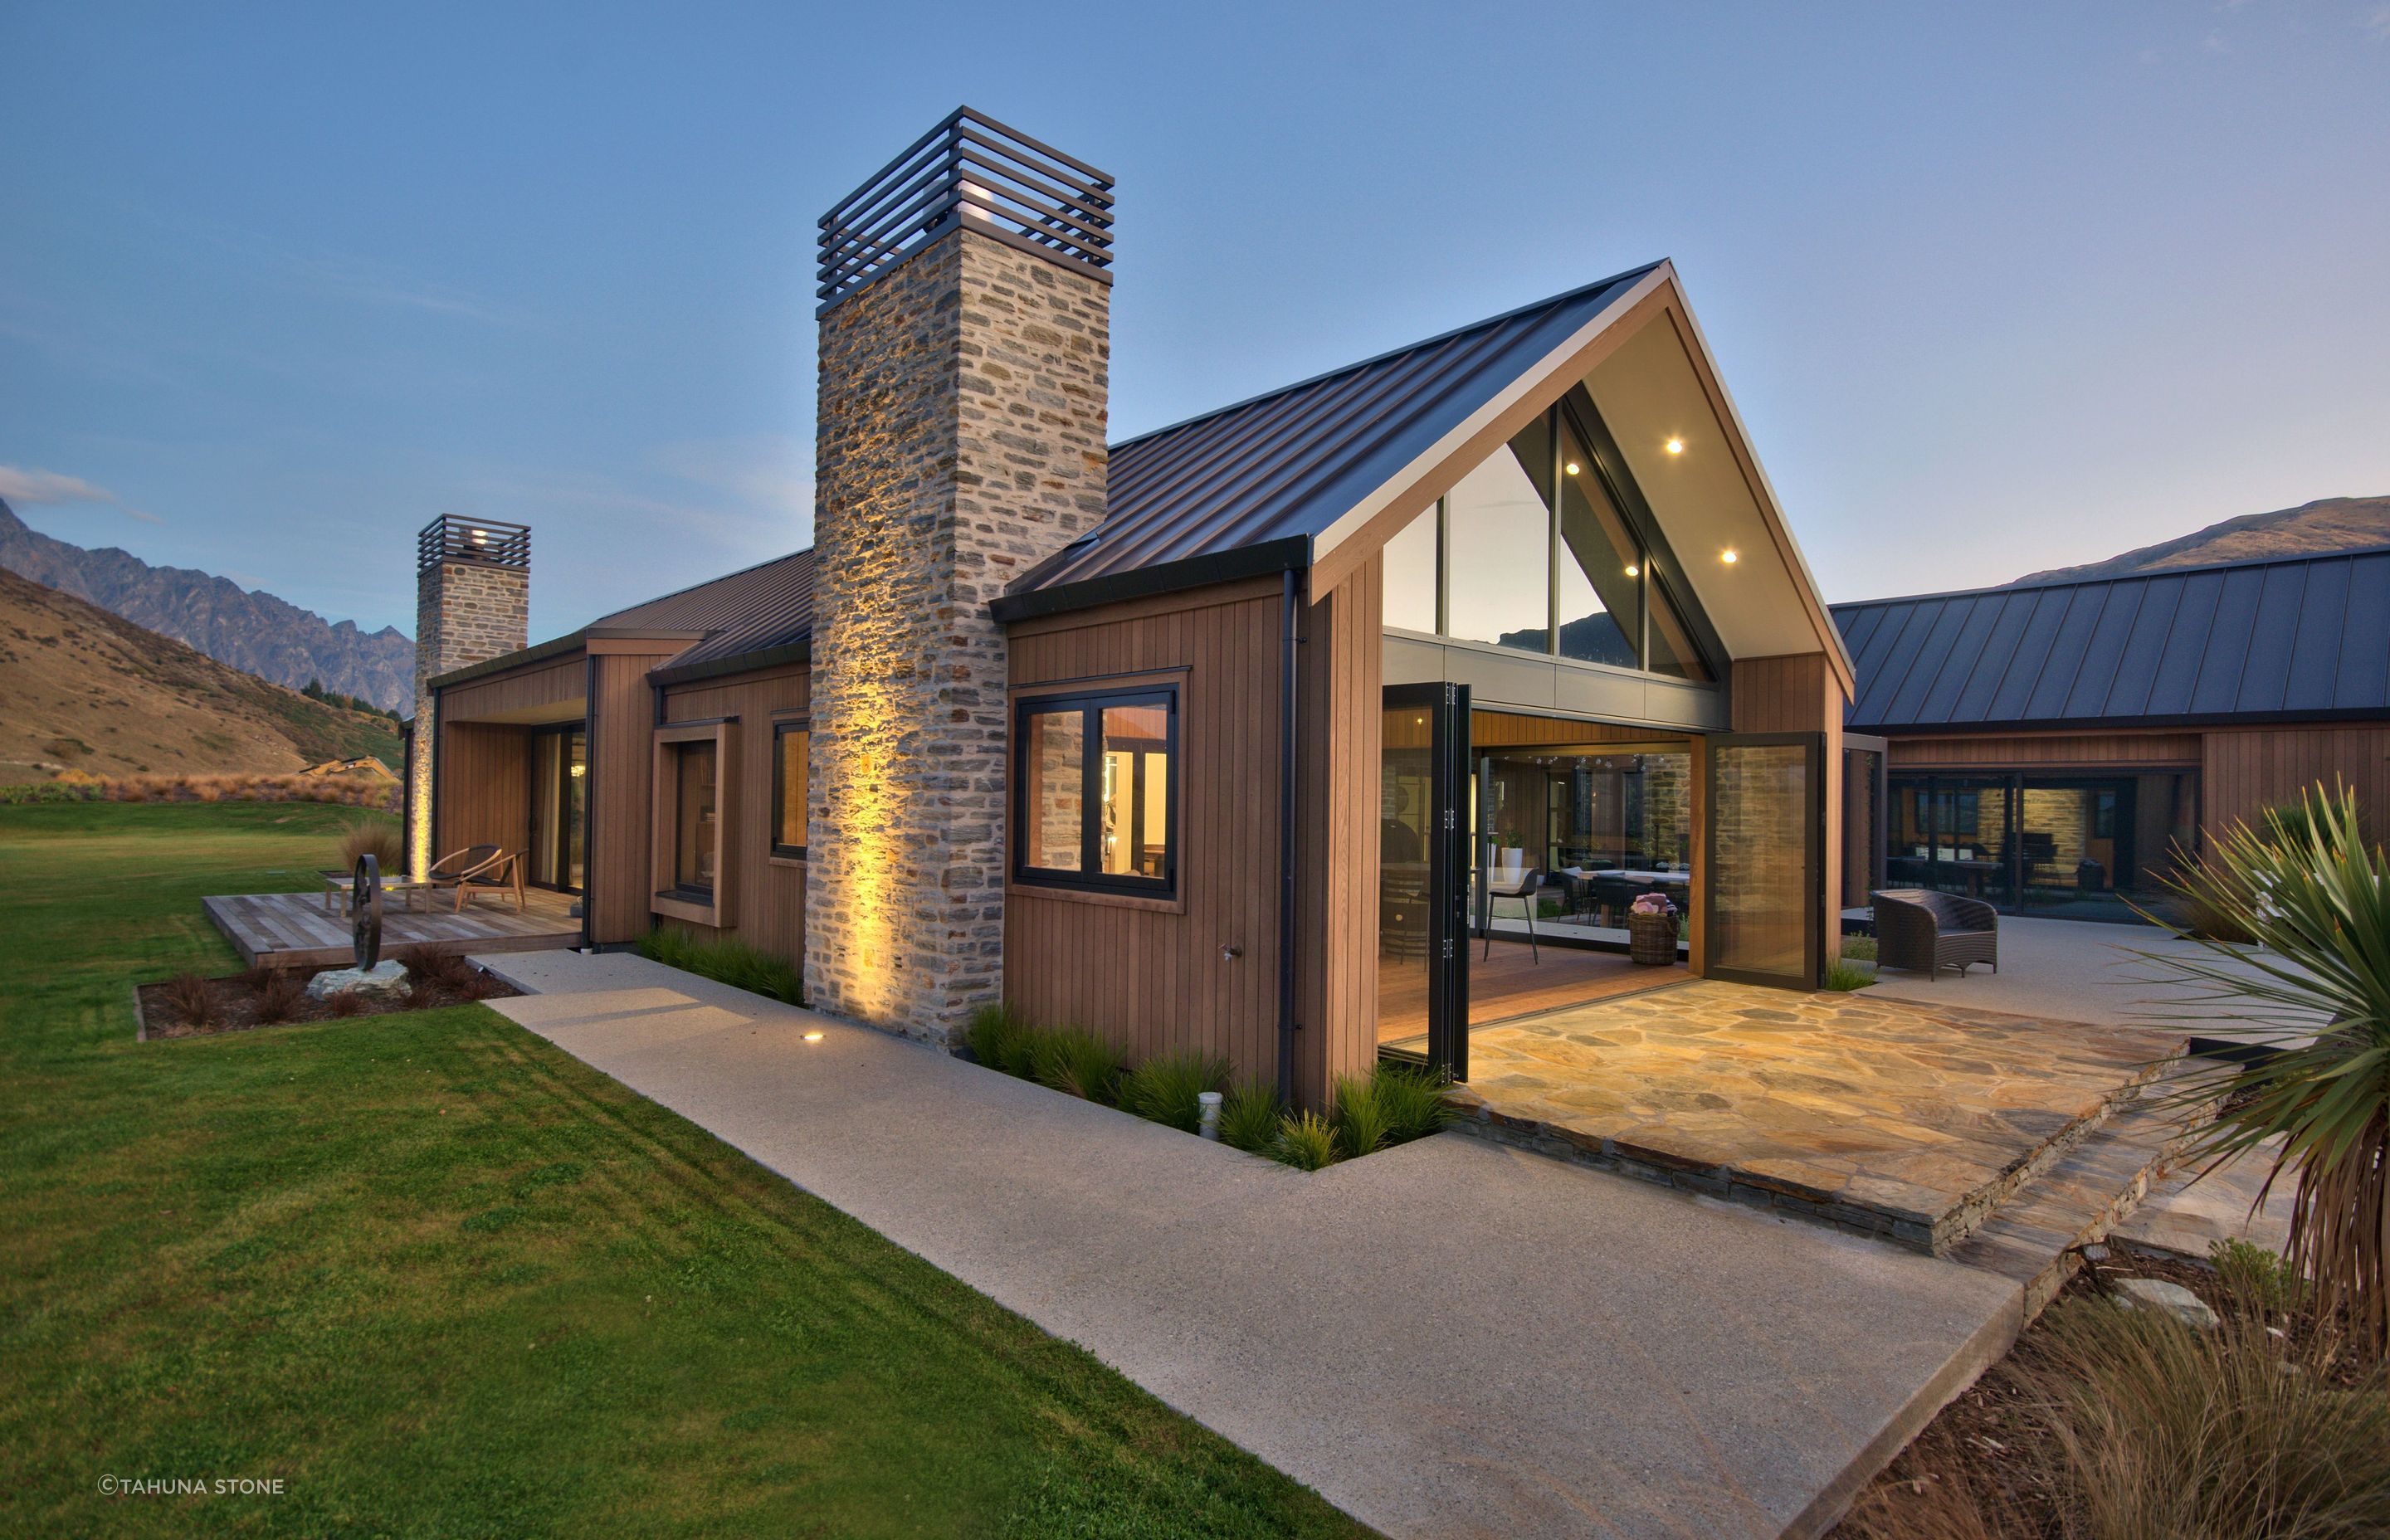 Unlike many other building materials, stone can become more beautiful over time with minimal to zero maintenance.